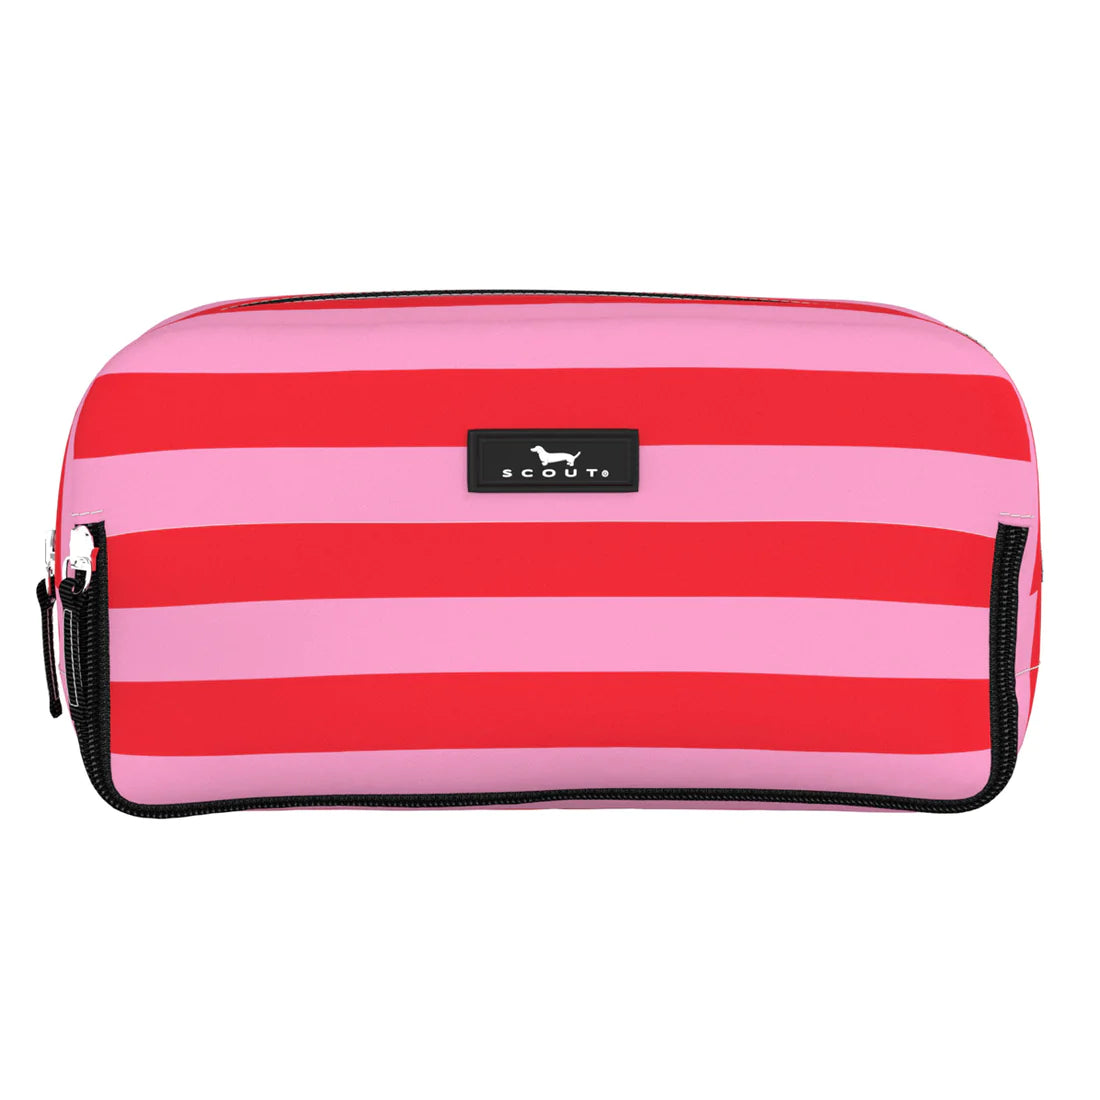 Scout 3-Way Toiletry Bag - Chili Ray Cyrus